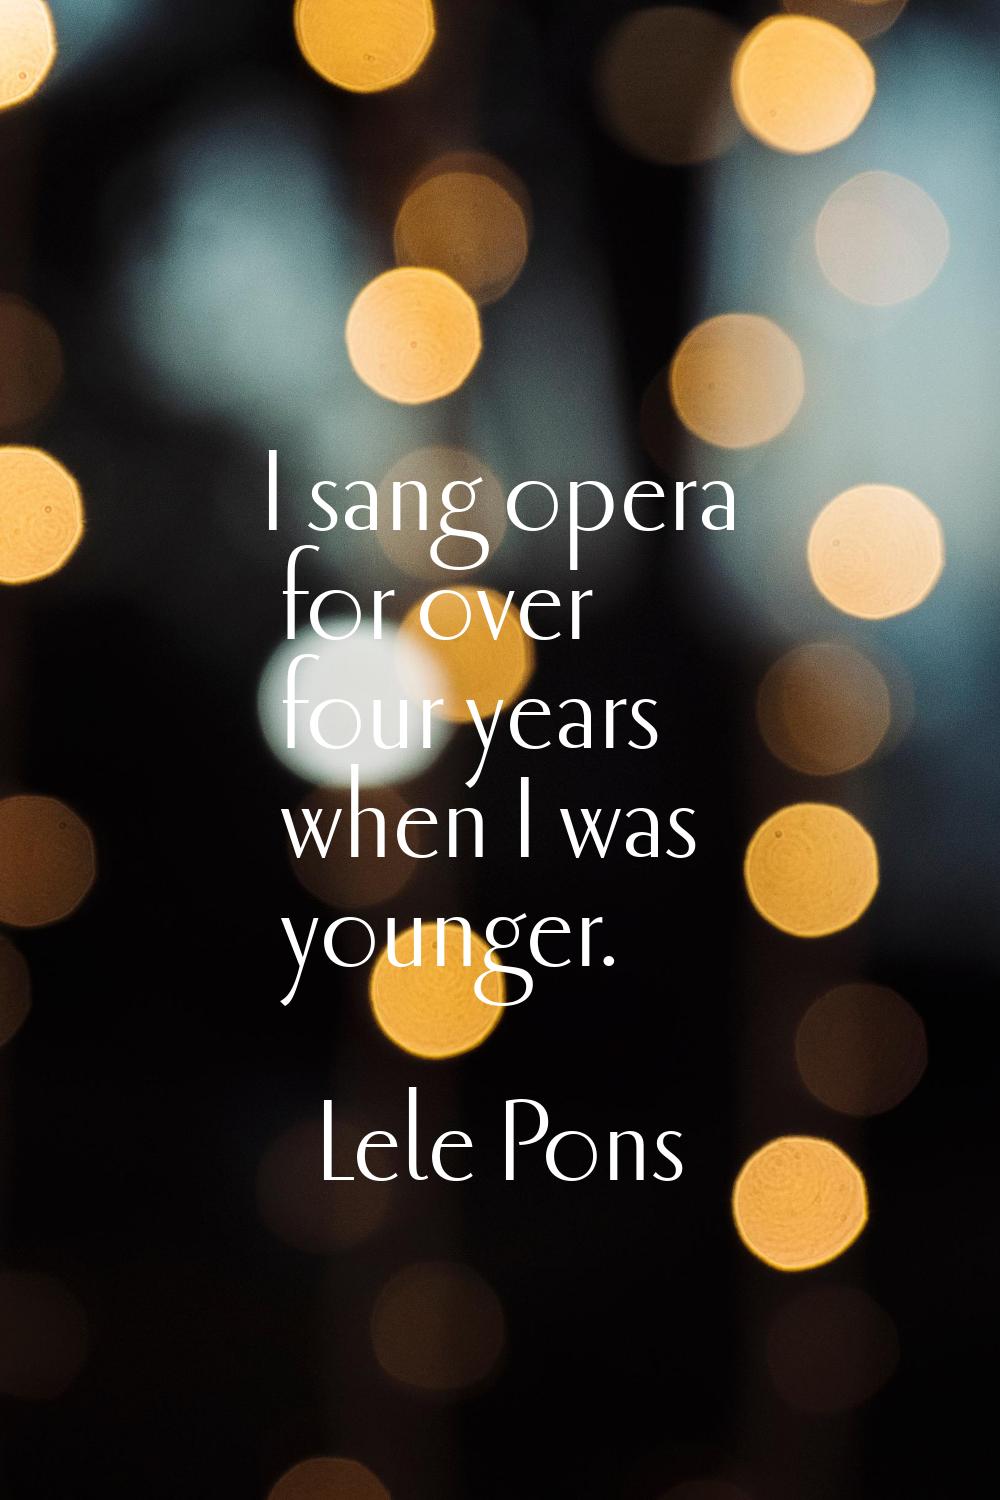 I sang opera for over four years when I was younger.